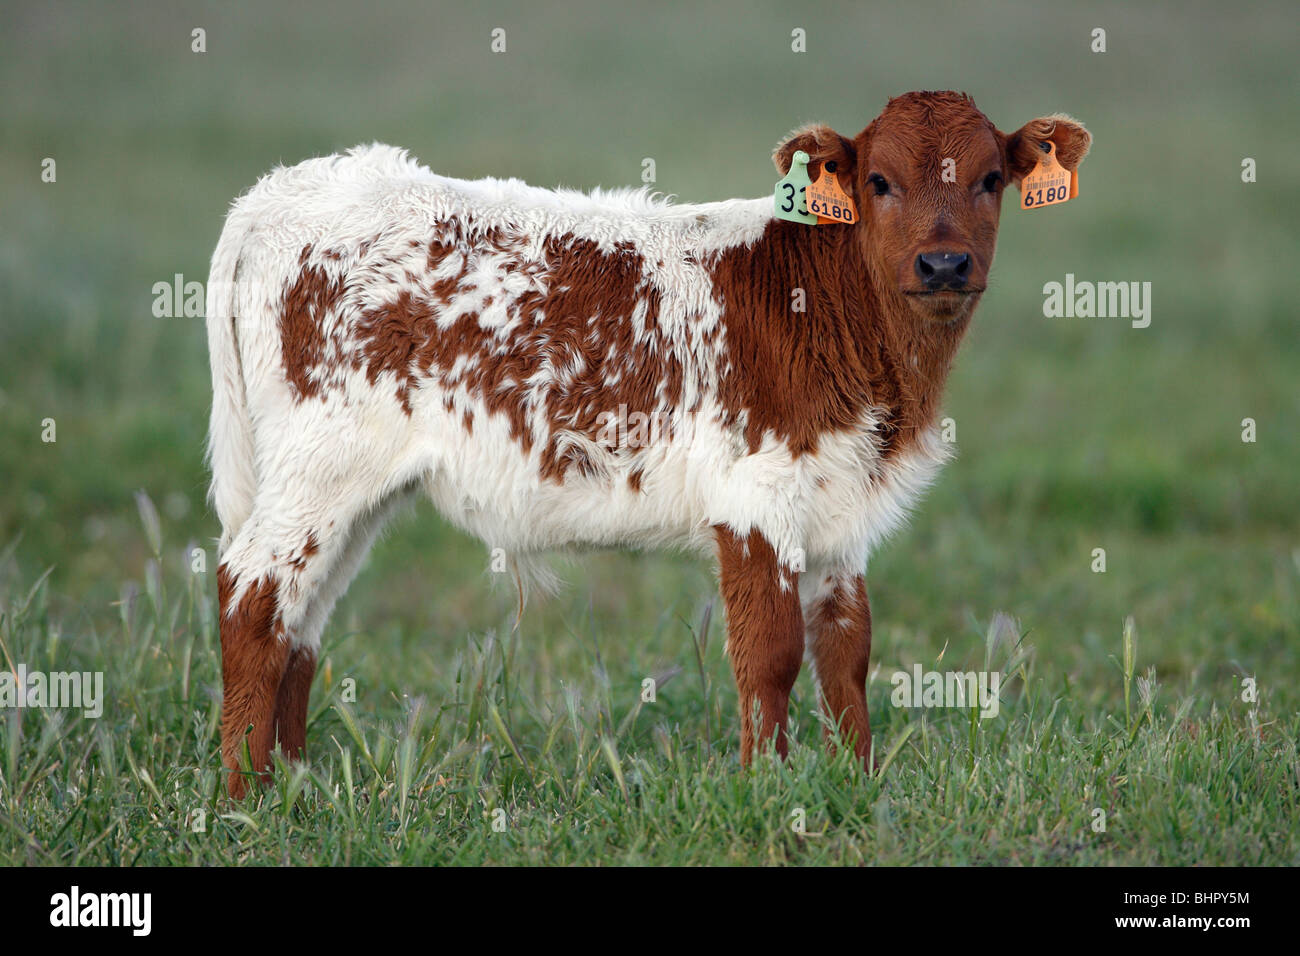 Cattle, bull calf with ear tags, beef cattle breed, Portugal Stock Photo